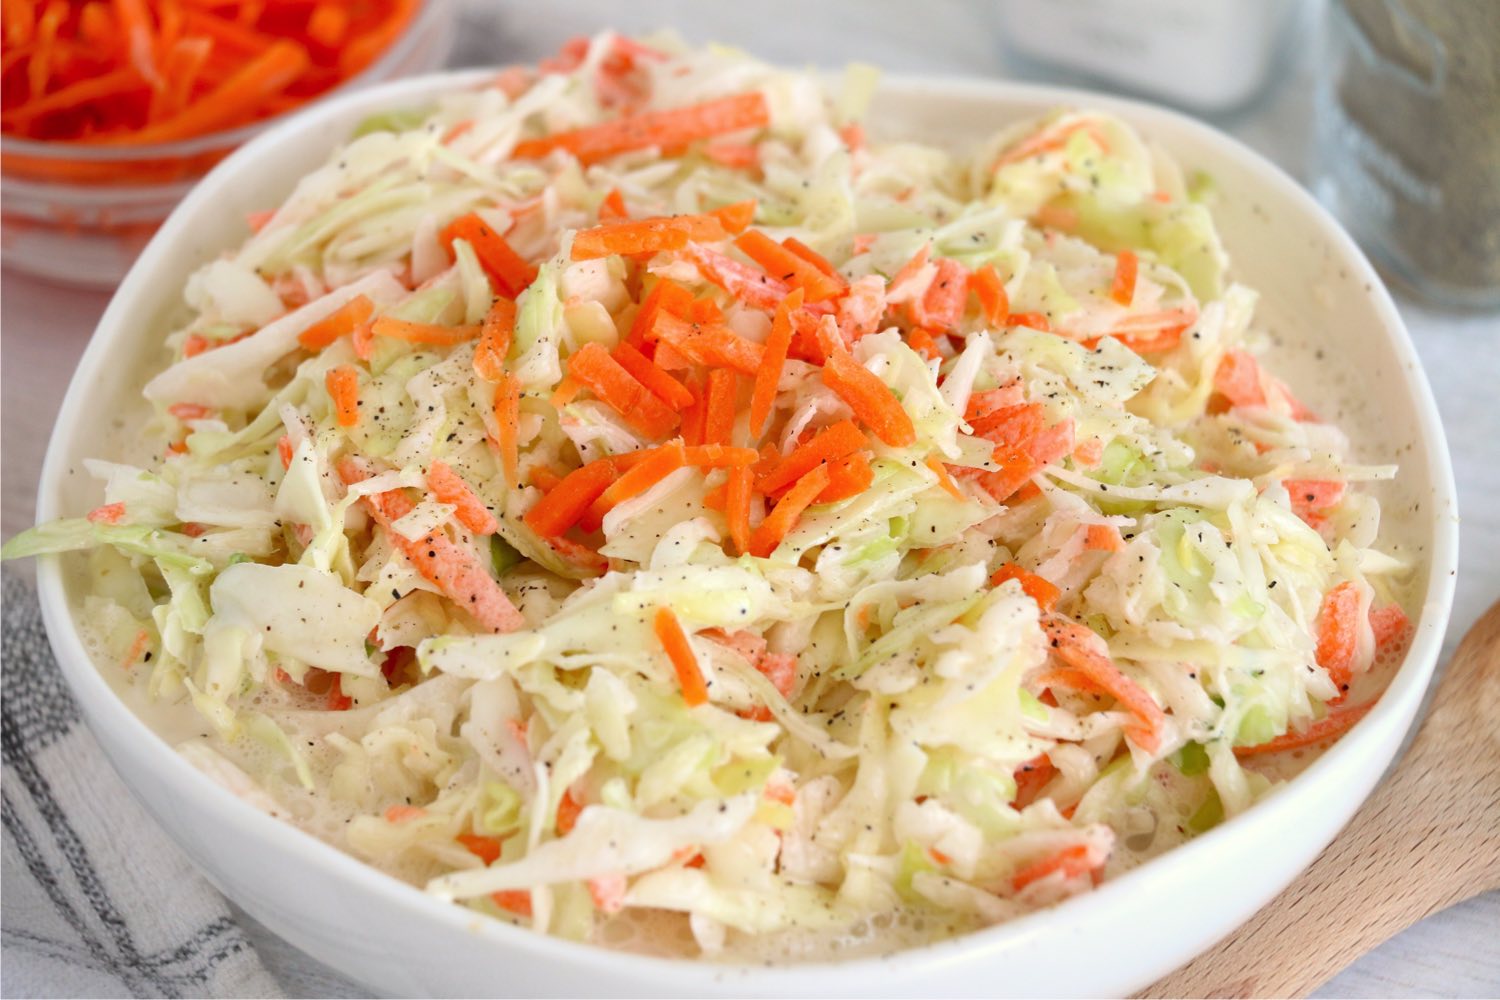 bowl of coleslaw with carrots for garnish